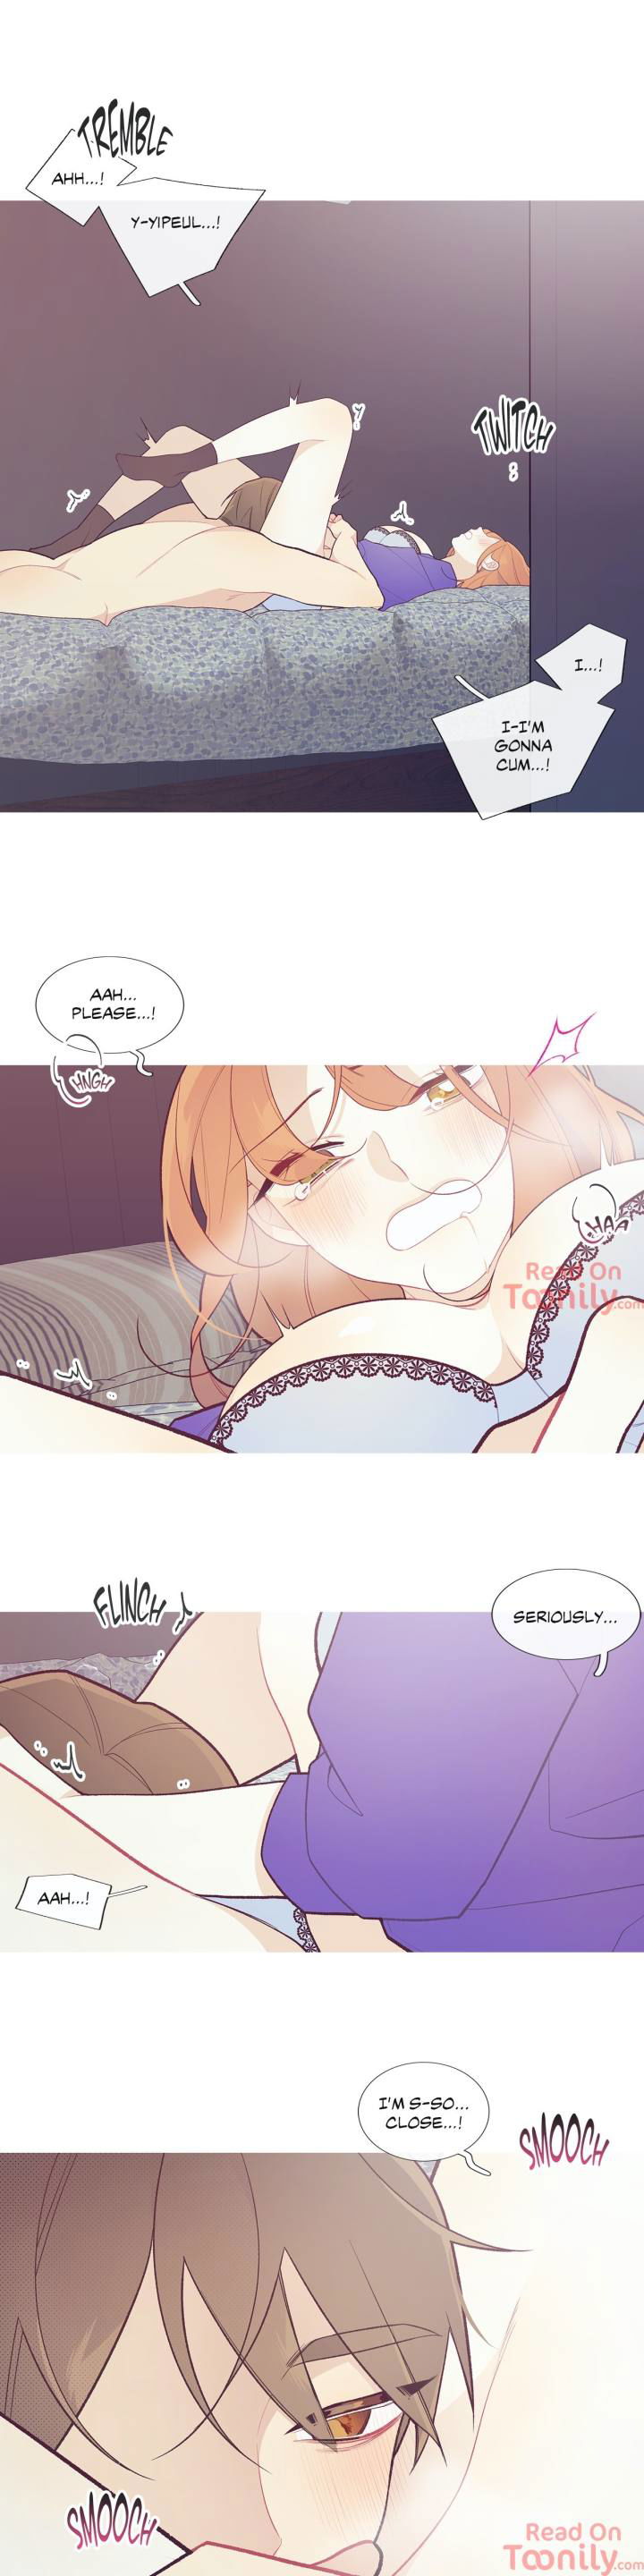 whats-going-on-chap-45-2